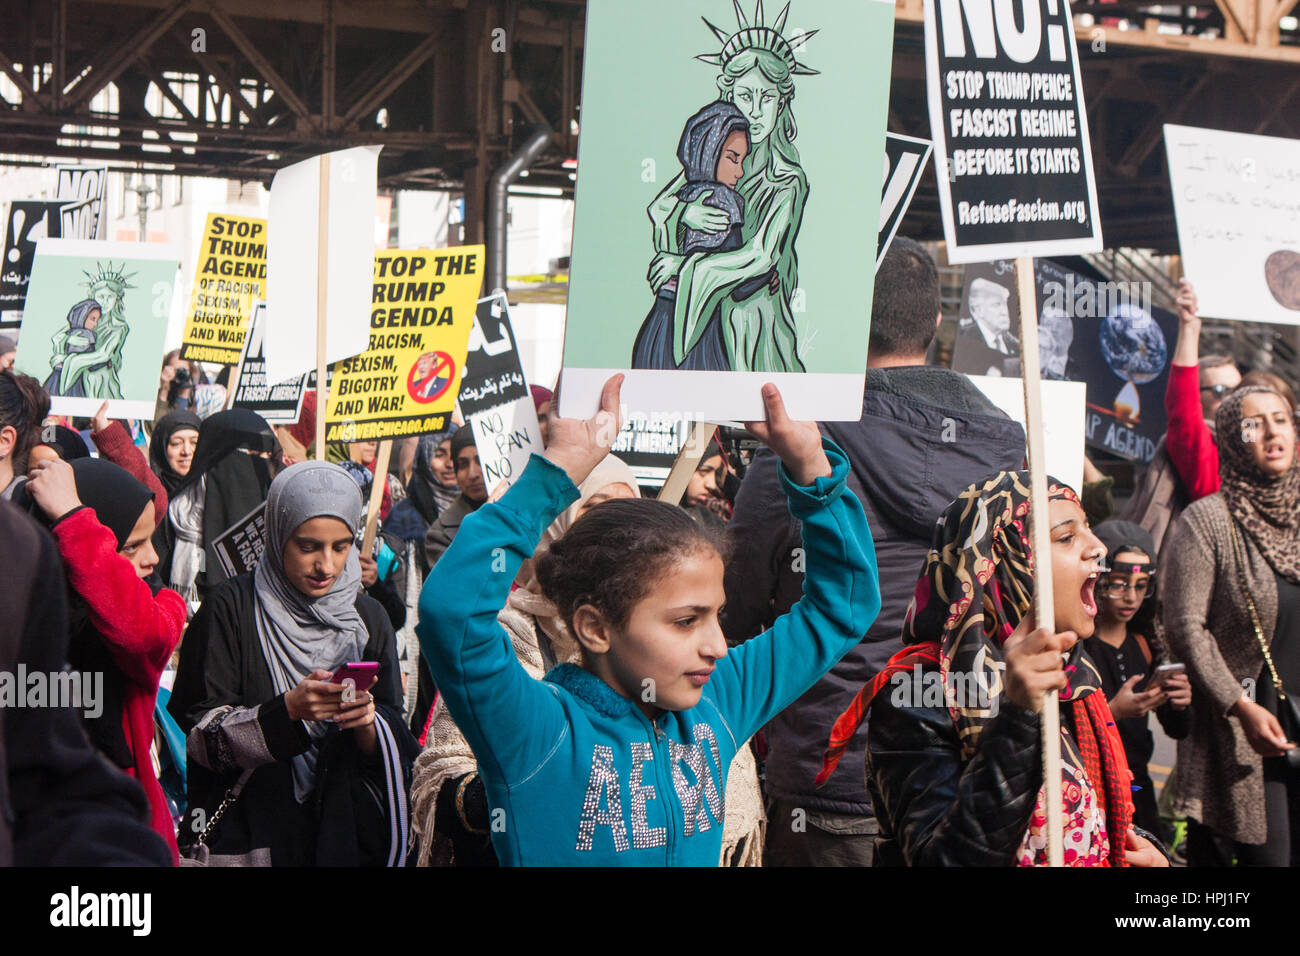 Chicago, Illinois - Feb. 19, 2017: Chicago marks the one-month anniversary of the Donald Trump administration with a protest rally and march. Stock Photo